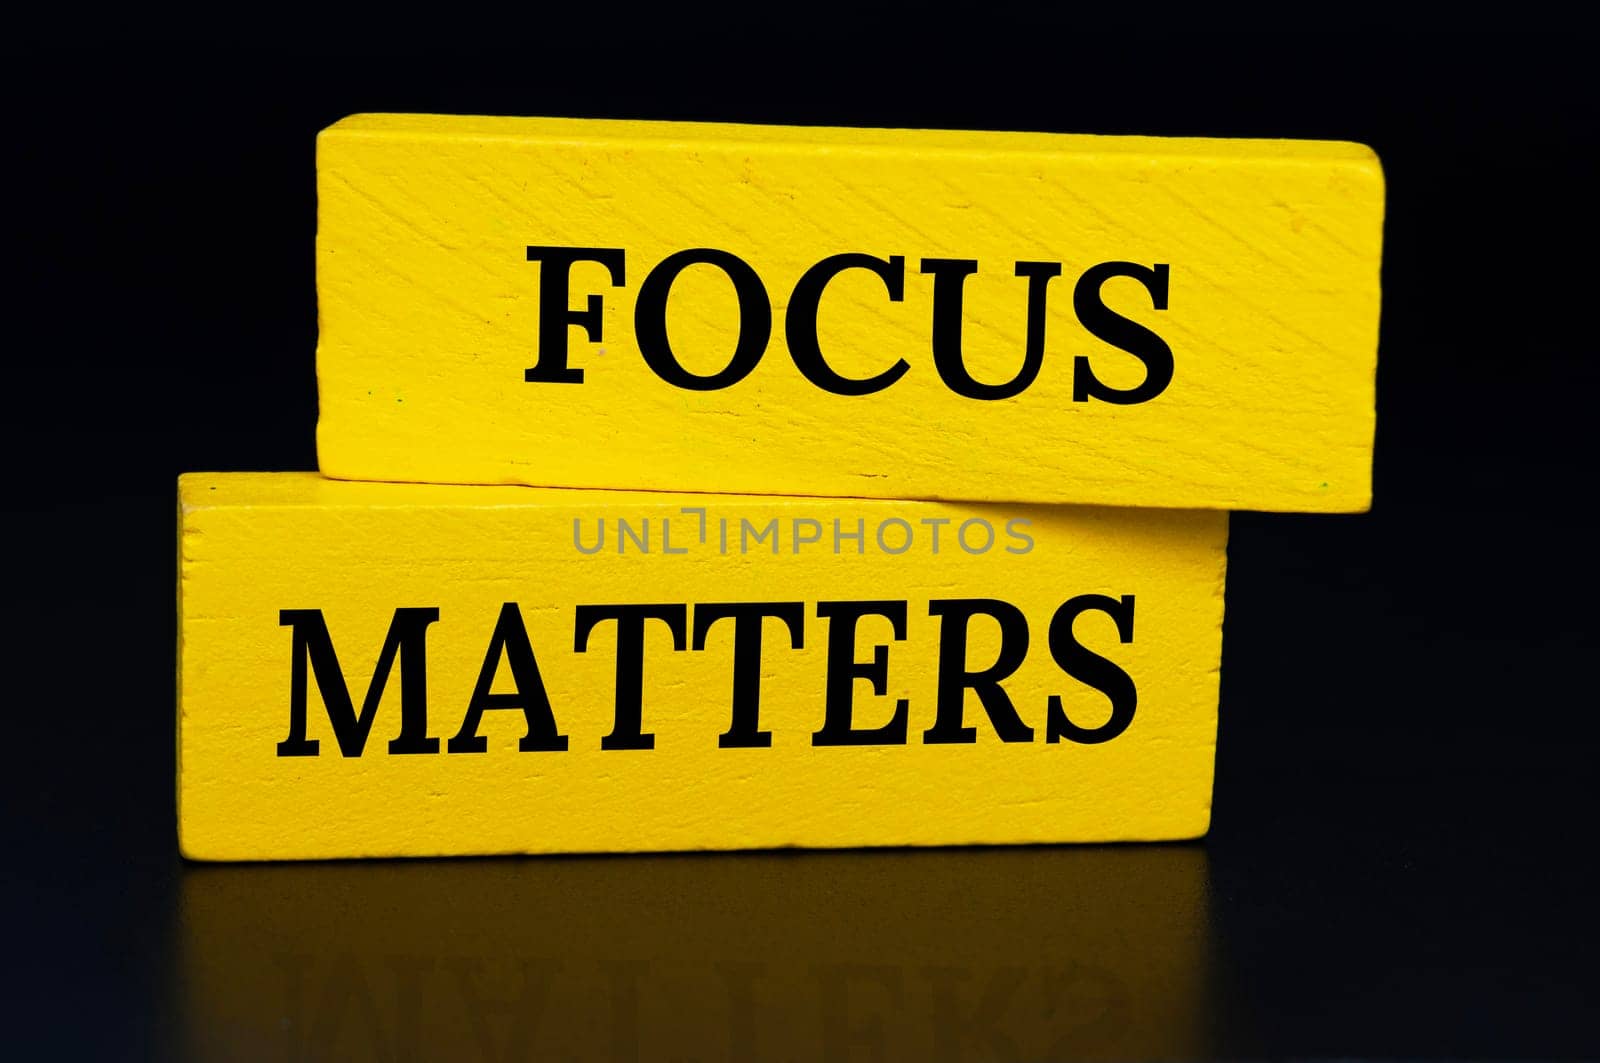 Focus matters text on yellow wooden blocks with dark cover background. Focusing concept by yom98